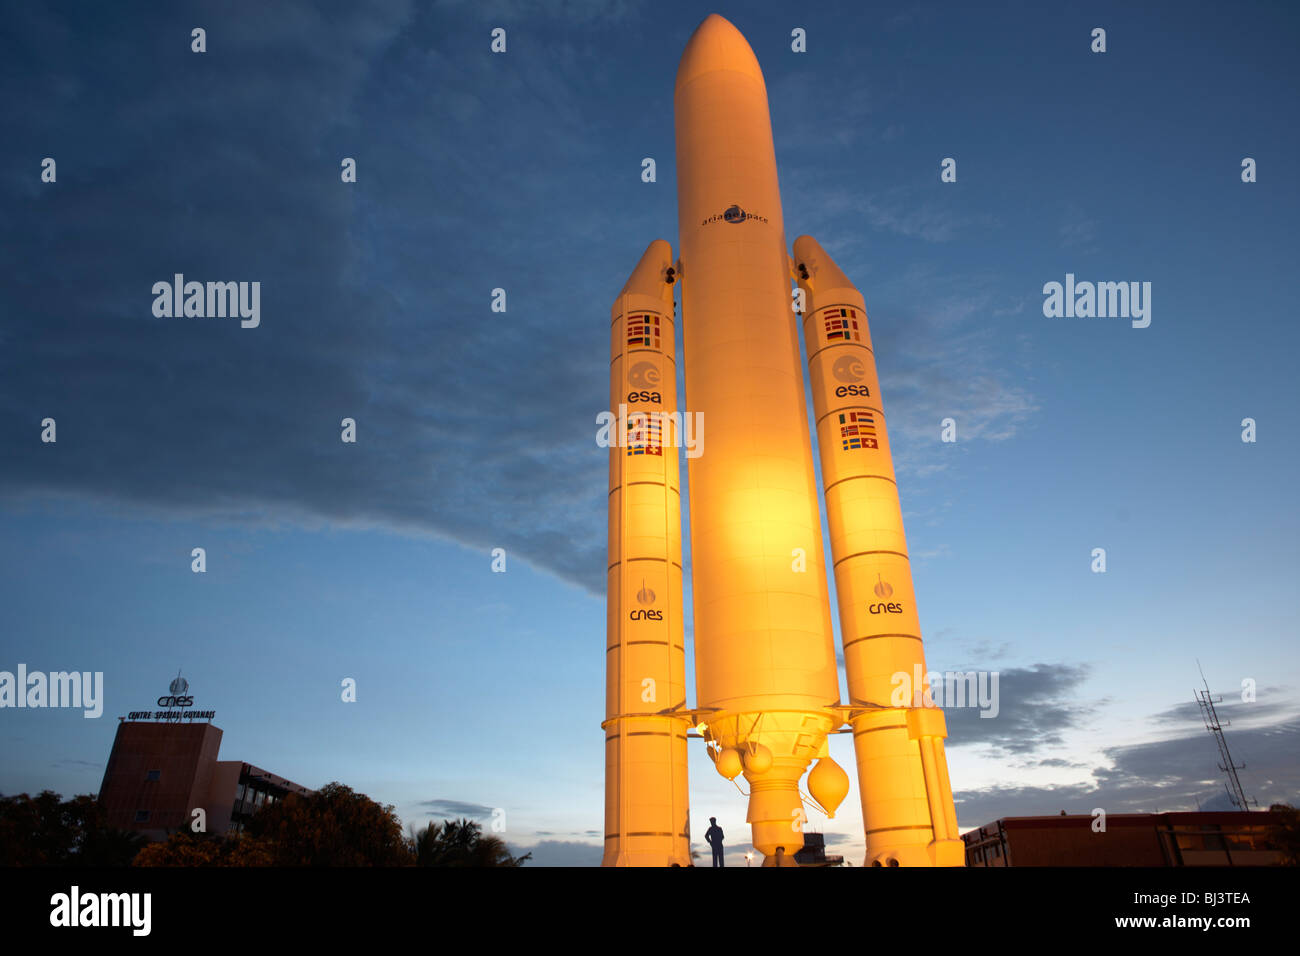 A full-scale model of a 50.5 meter-high European Space Agency's (ESA) Ariane 5 rocket at museum of Guiana Space Centre Stock Photo